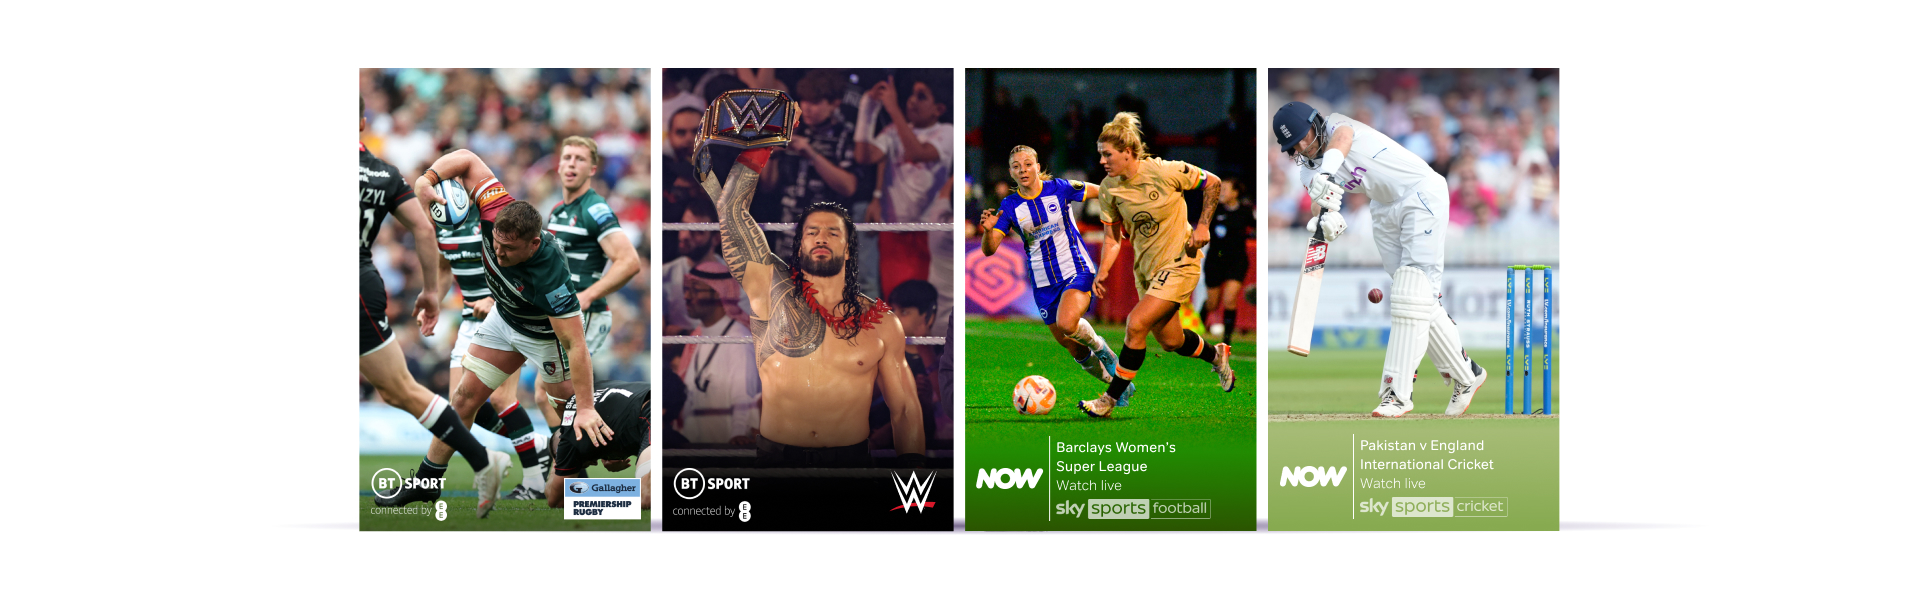 Our sports coverage includes the UEFA Champions League, Premiership Rugby, UFC, WWE and more